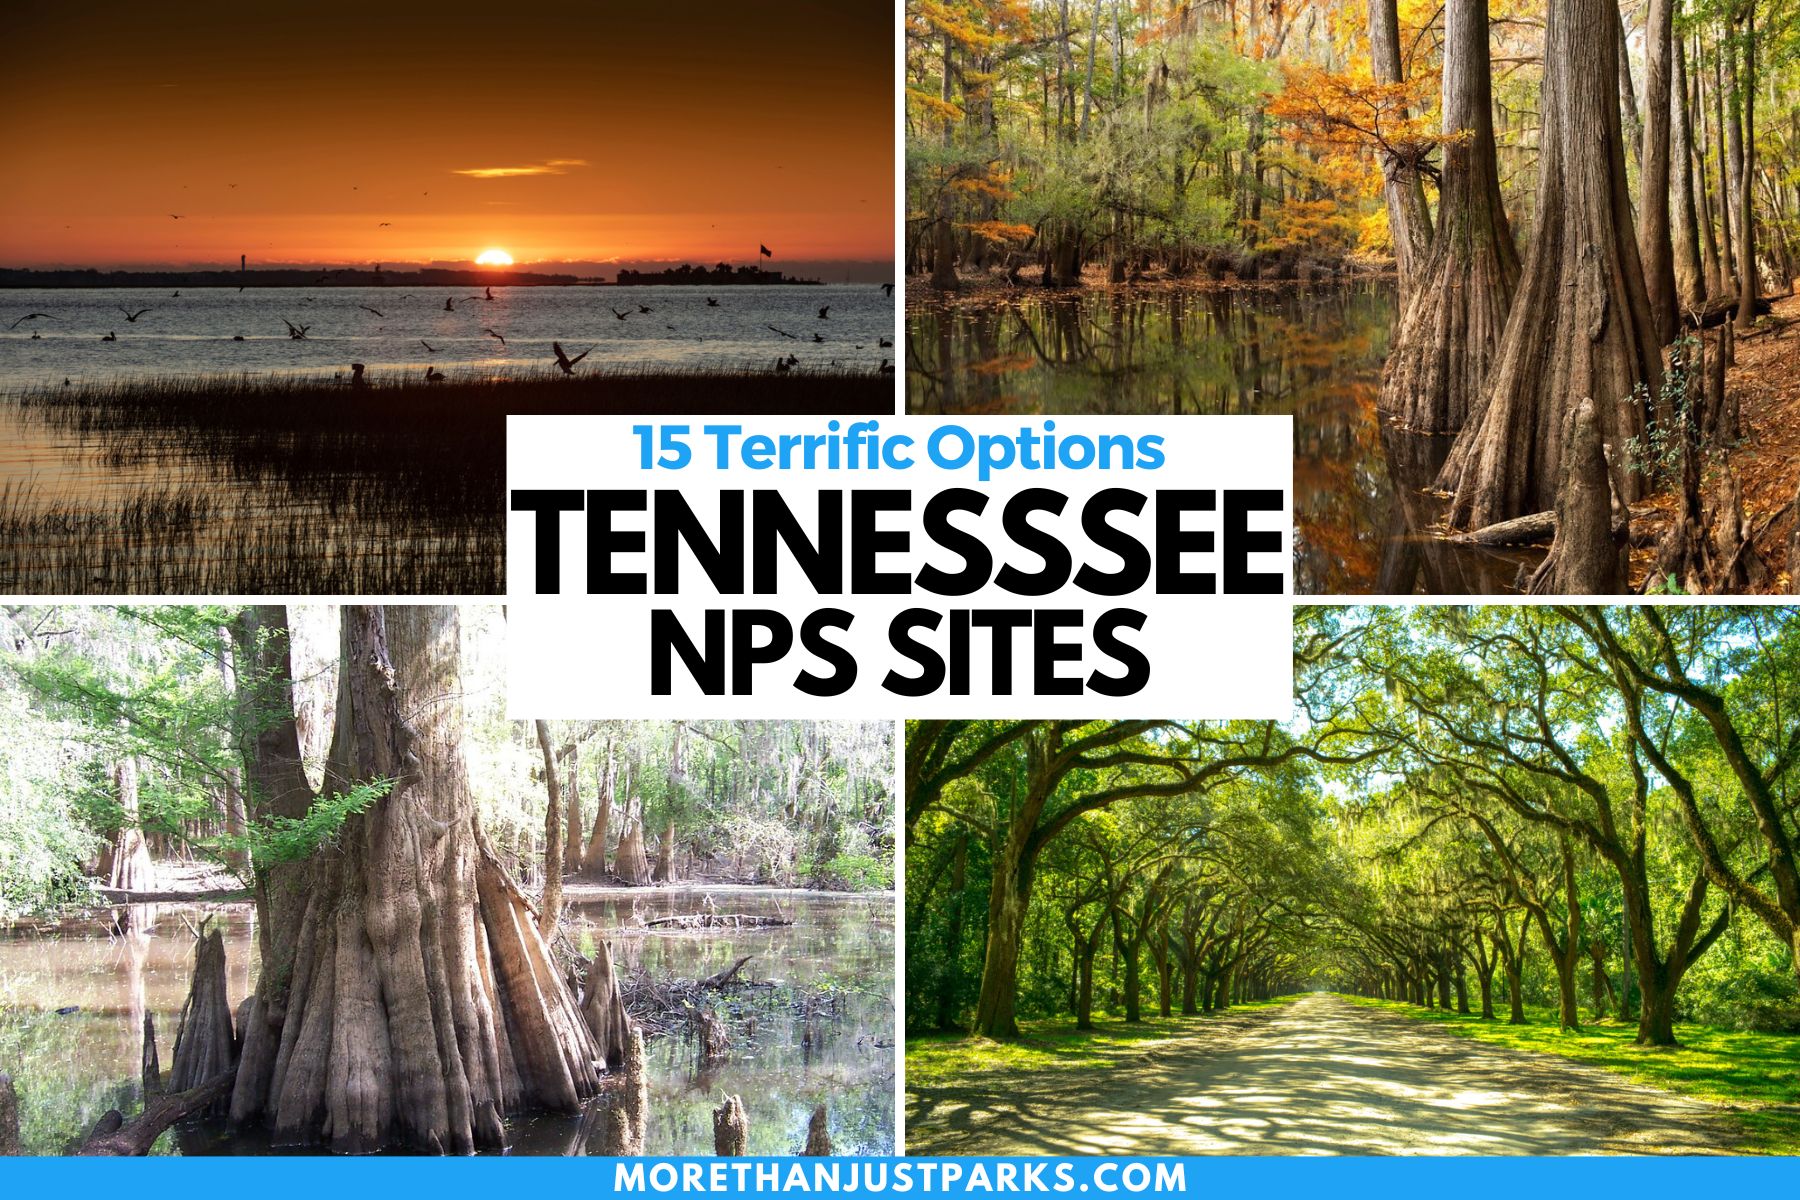 Tennessee NPS Sites